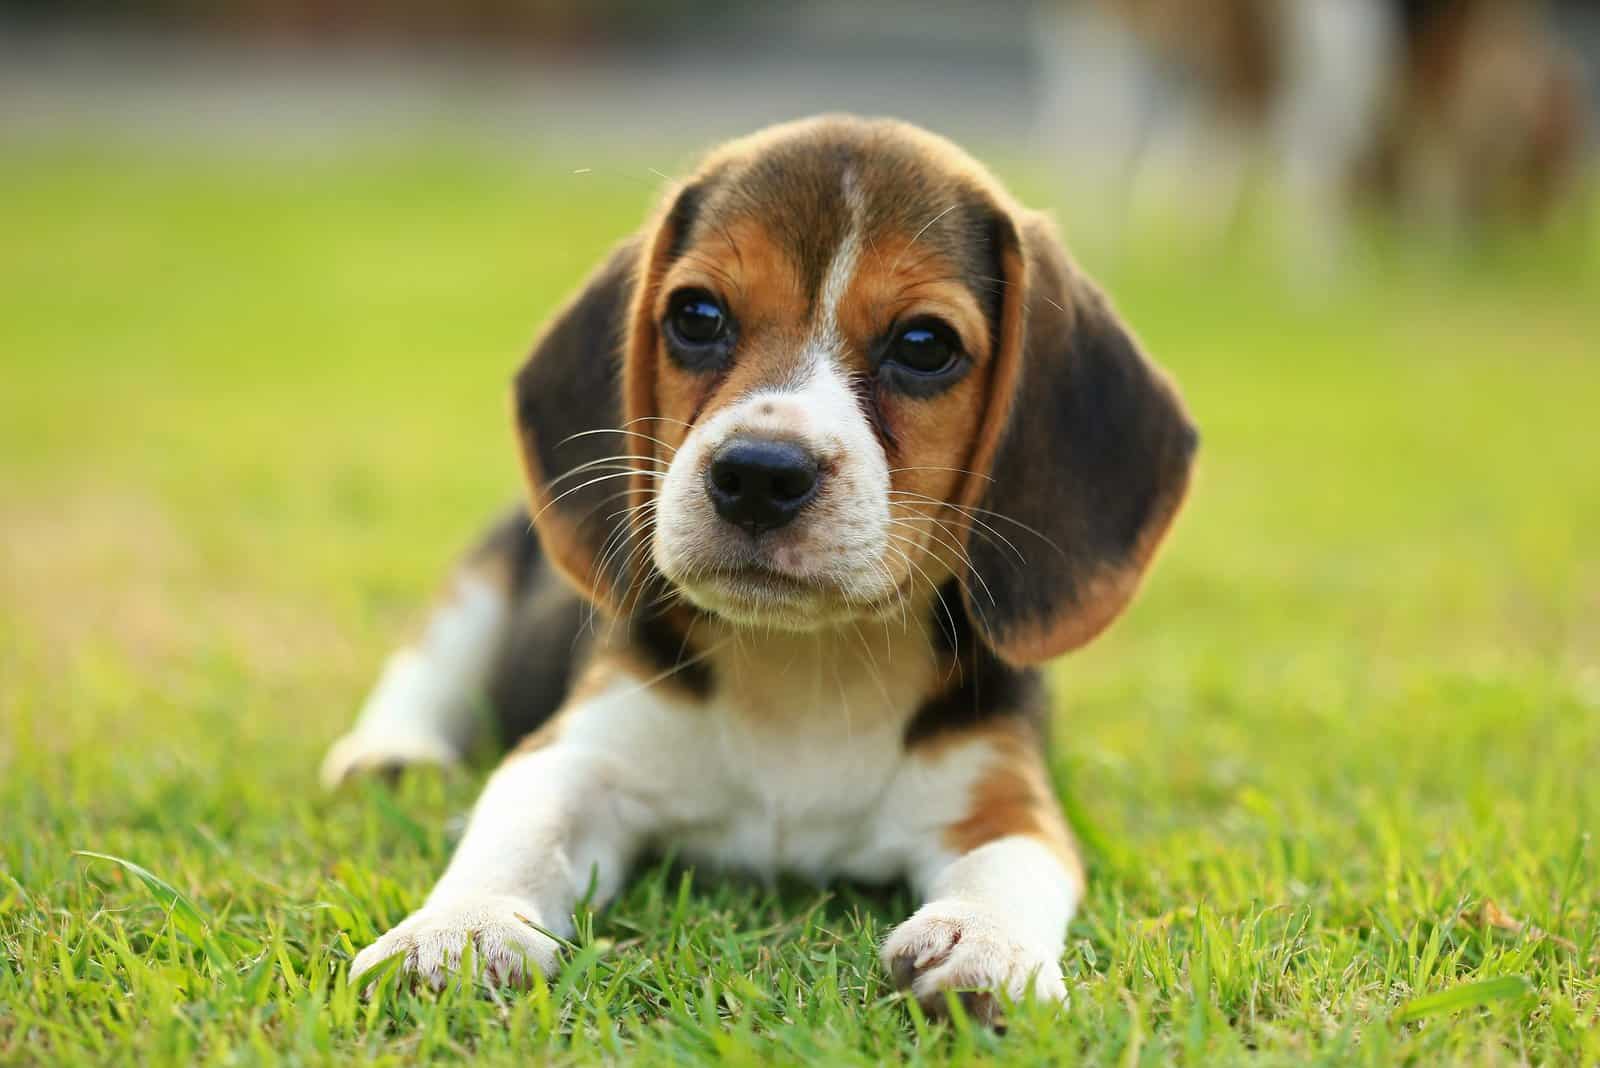 cute beagle puppy lying in grass outdoor